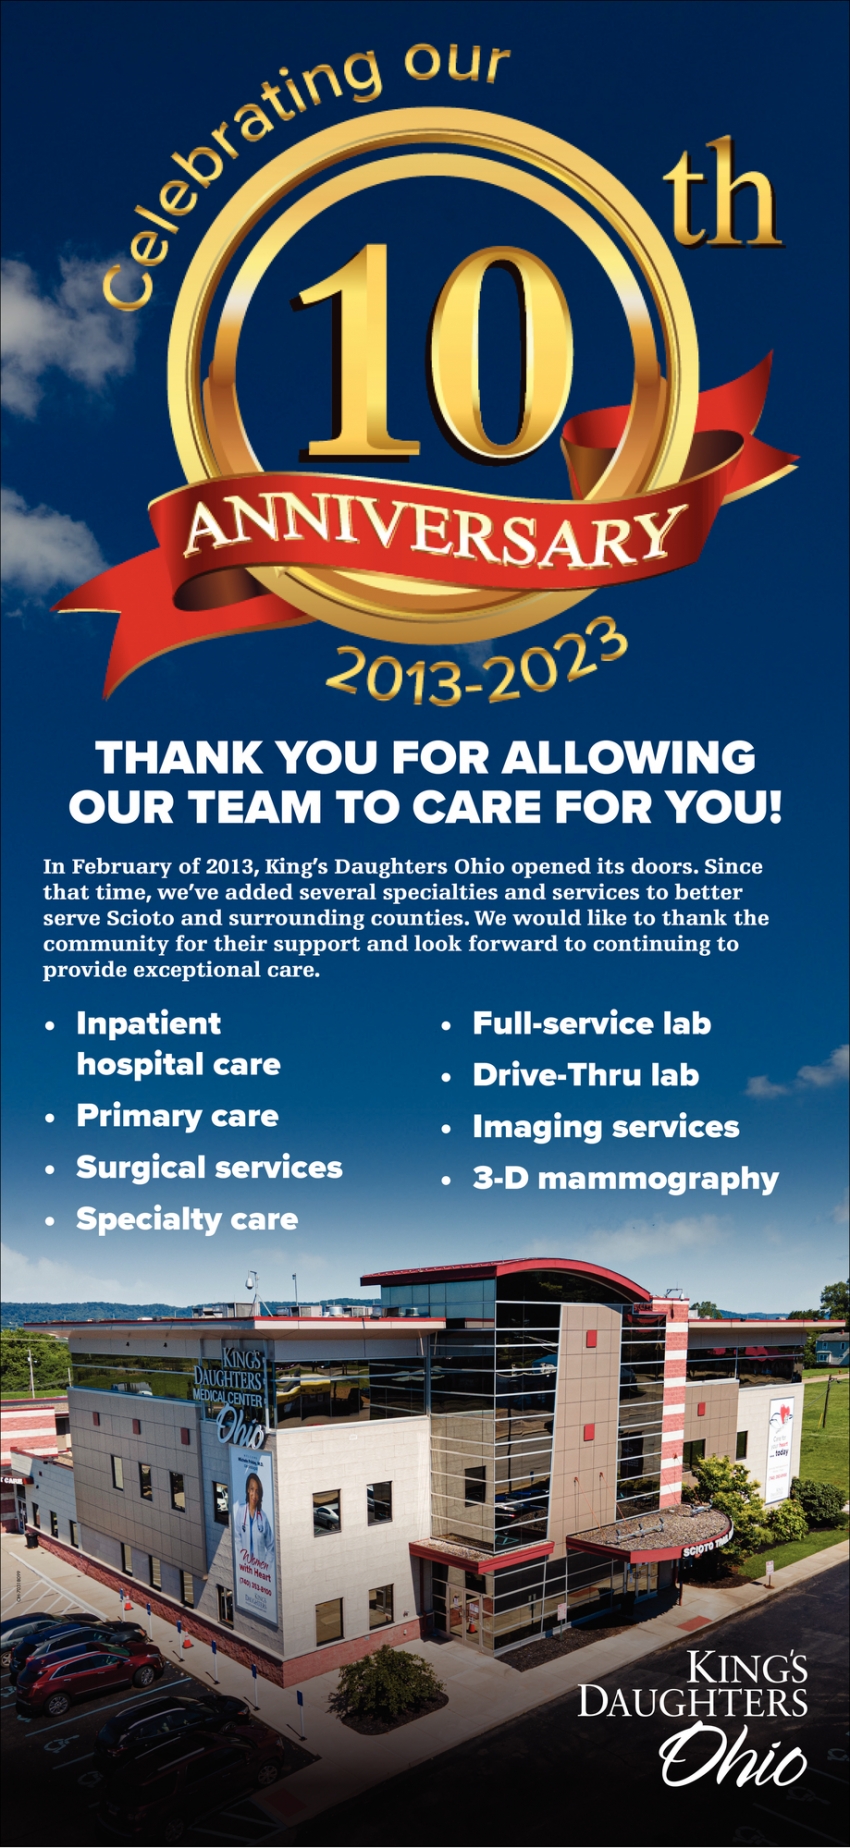 Thank You for Allowing Our Team to Care for You!